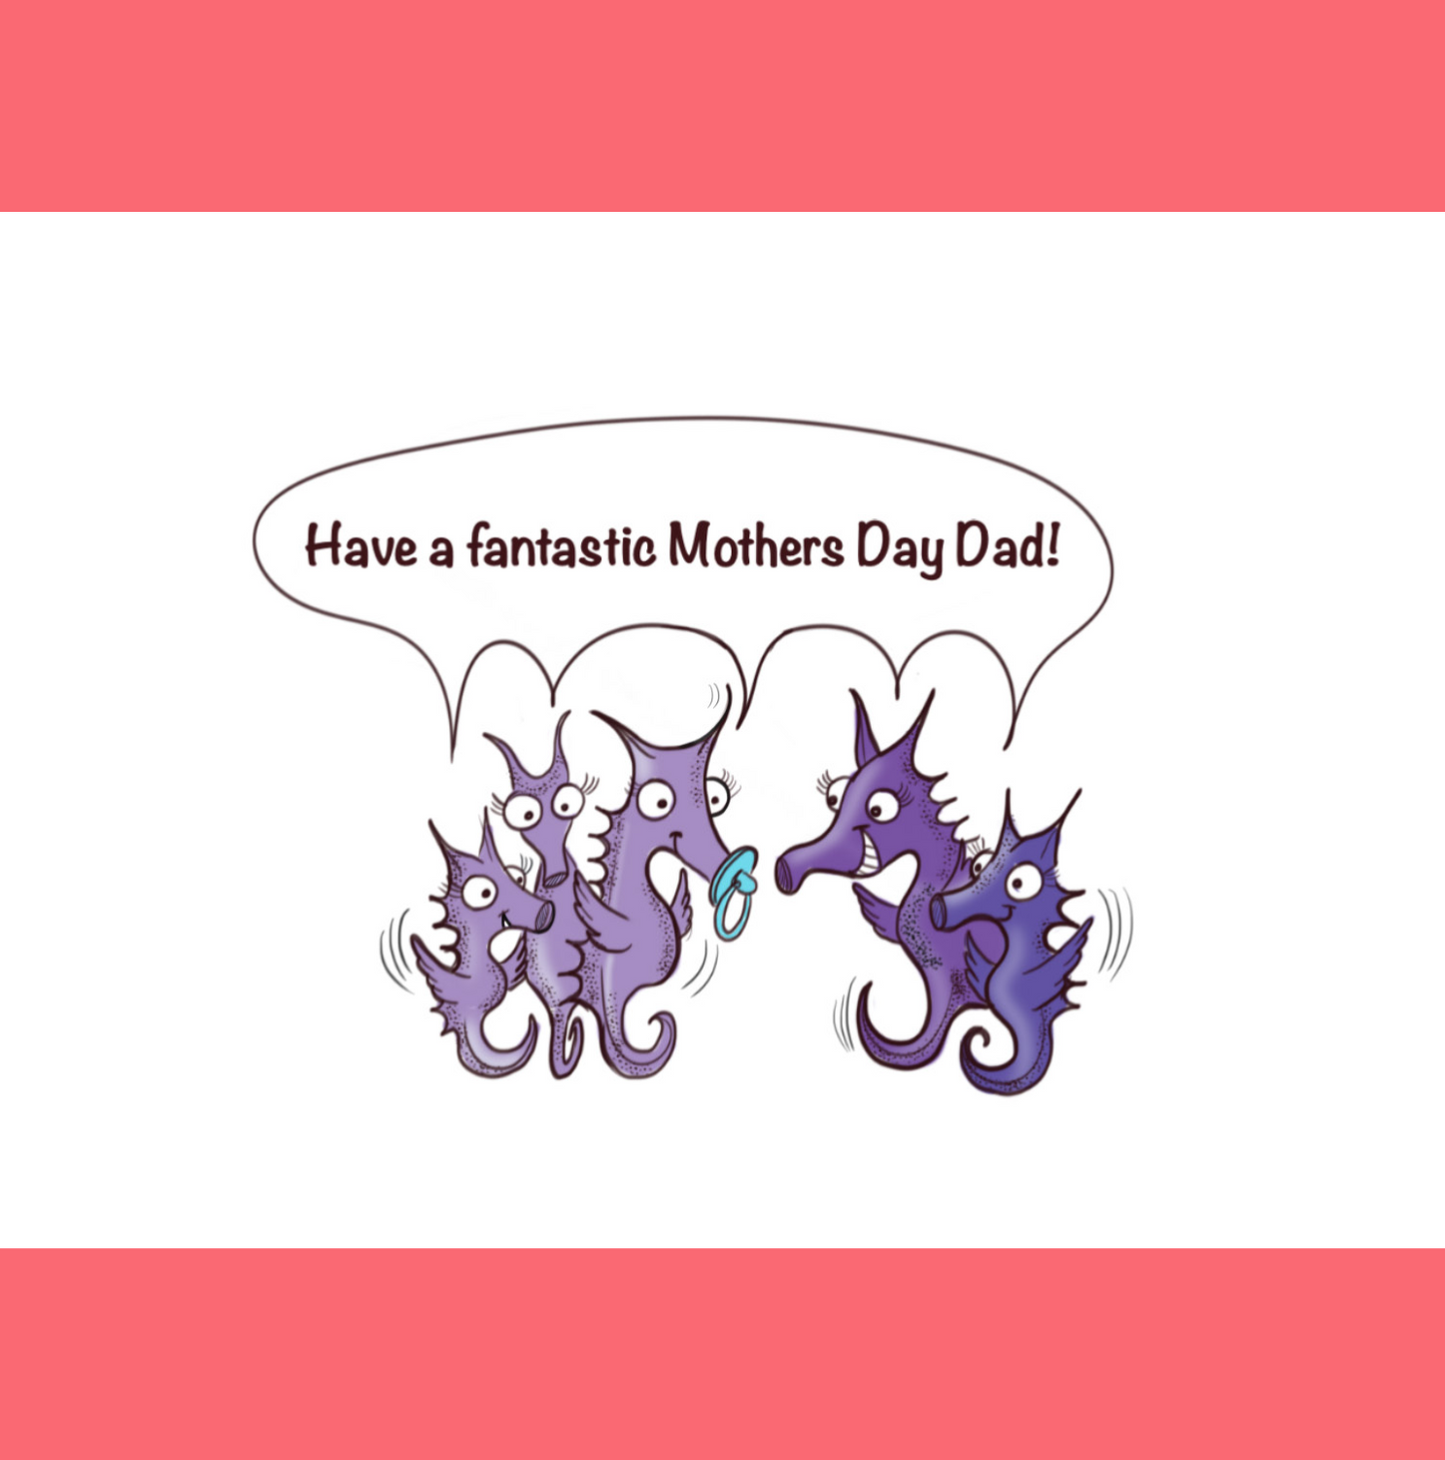 Happy Mother's Day Dad Greeting Card